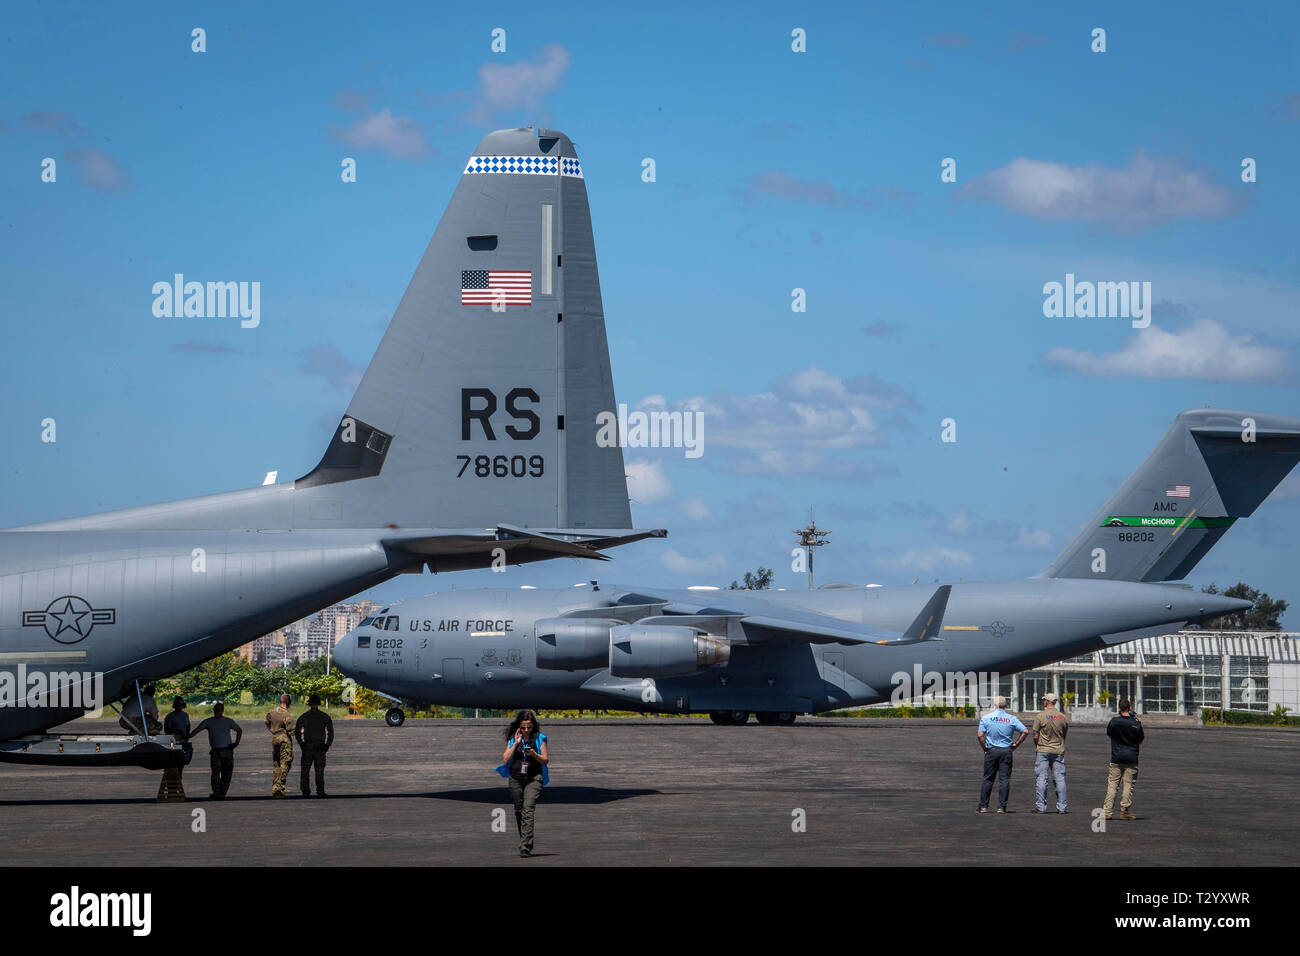 A U.S. Air Force C-17 assigned to the 16th Airlift Wing, Joint Base Charleston, Charleston, South Carolina, taxies into position as a U.S. Air Force C-130J Hercules assigned to the 75th Expeditionary Airlift Squadron, Combined Joint Task Force-Horn of Africa (CJTF-HOA) is loaded with aid from the United Nations International Children's Emergency Fund (UNICEF), at the airport in Maputo, Mozambique, April 4, 2019. The task force is helping meet requirements identified by USAID assessment teams and humanitarian organizations working in the region by providing logistics support and manpower to USA Stock Photo